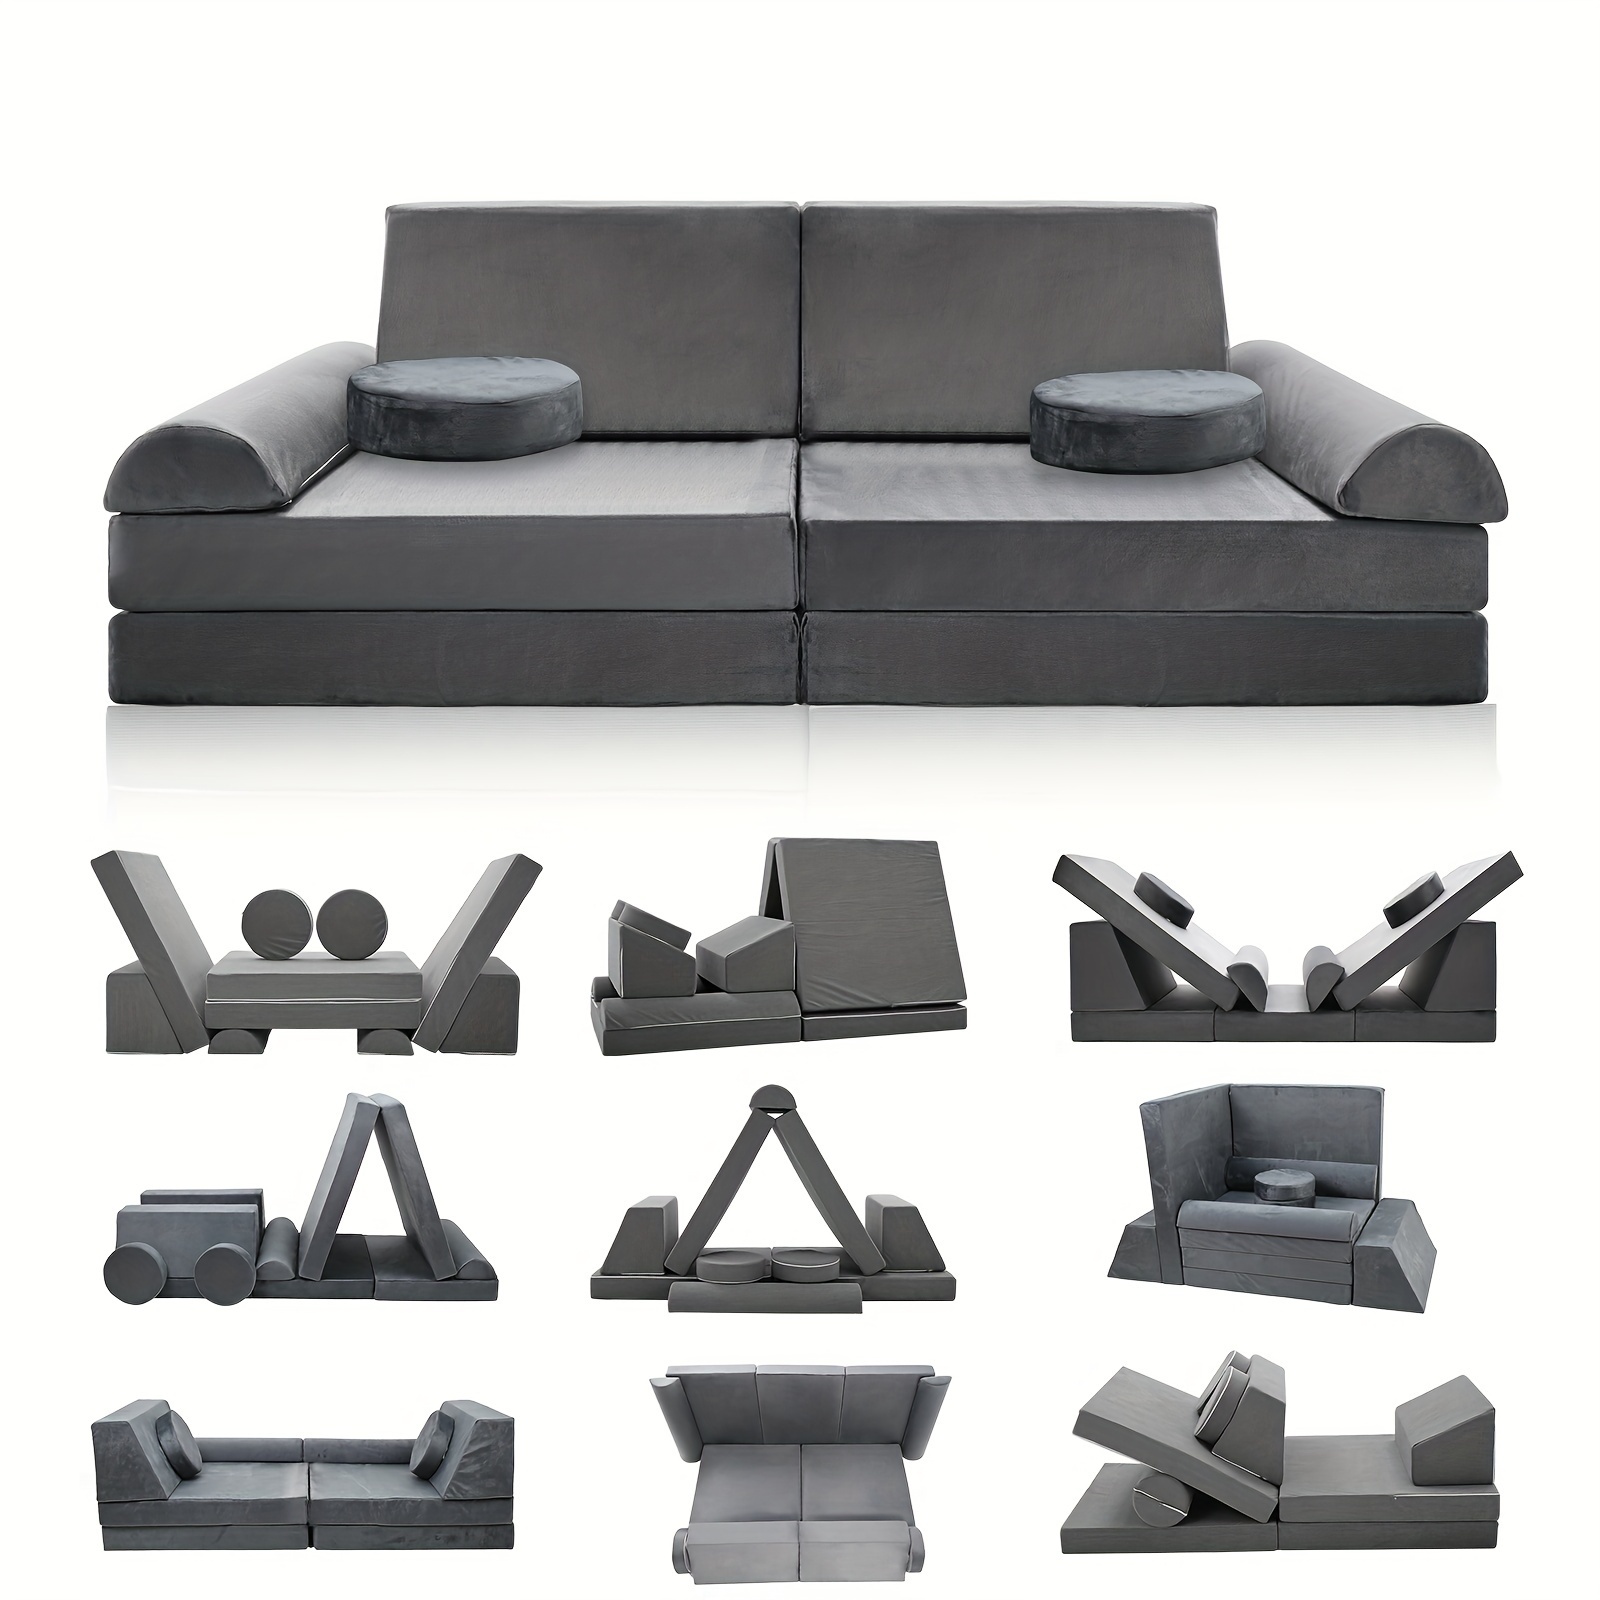 

10pcs Imaginative Couch Sofa Set, Modular Couch For Playroom Bedroom, Convertible Foam And Floor Cushion For Playing, Creativing, Sleeping, 63"l, Gray